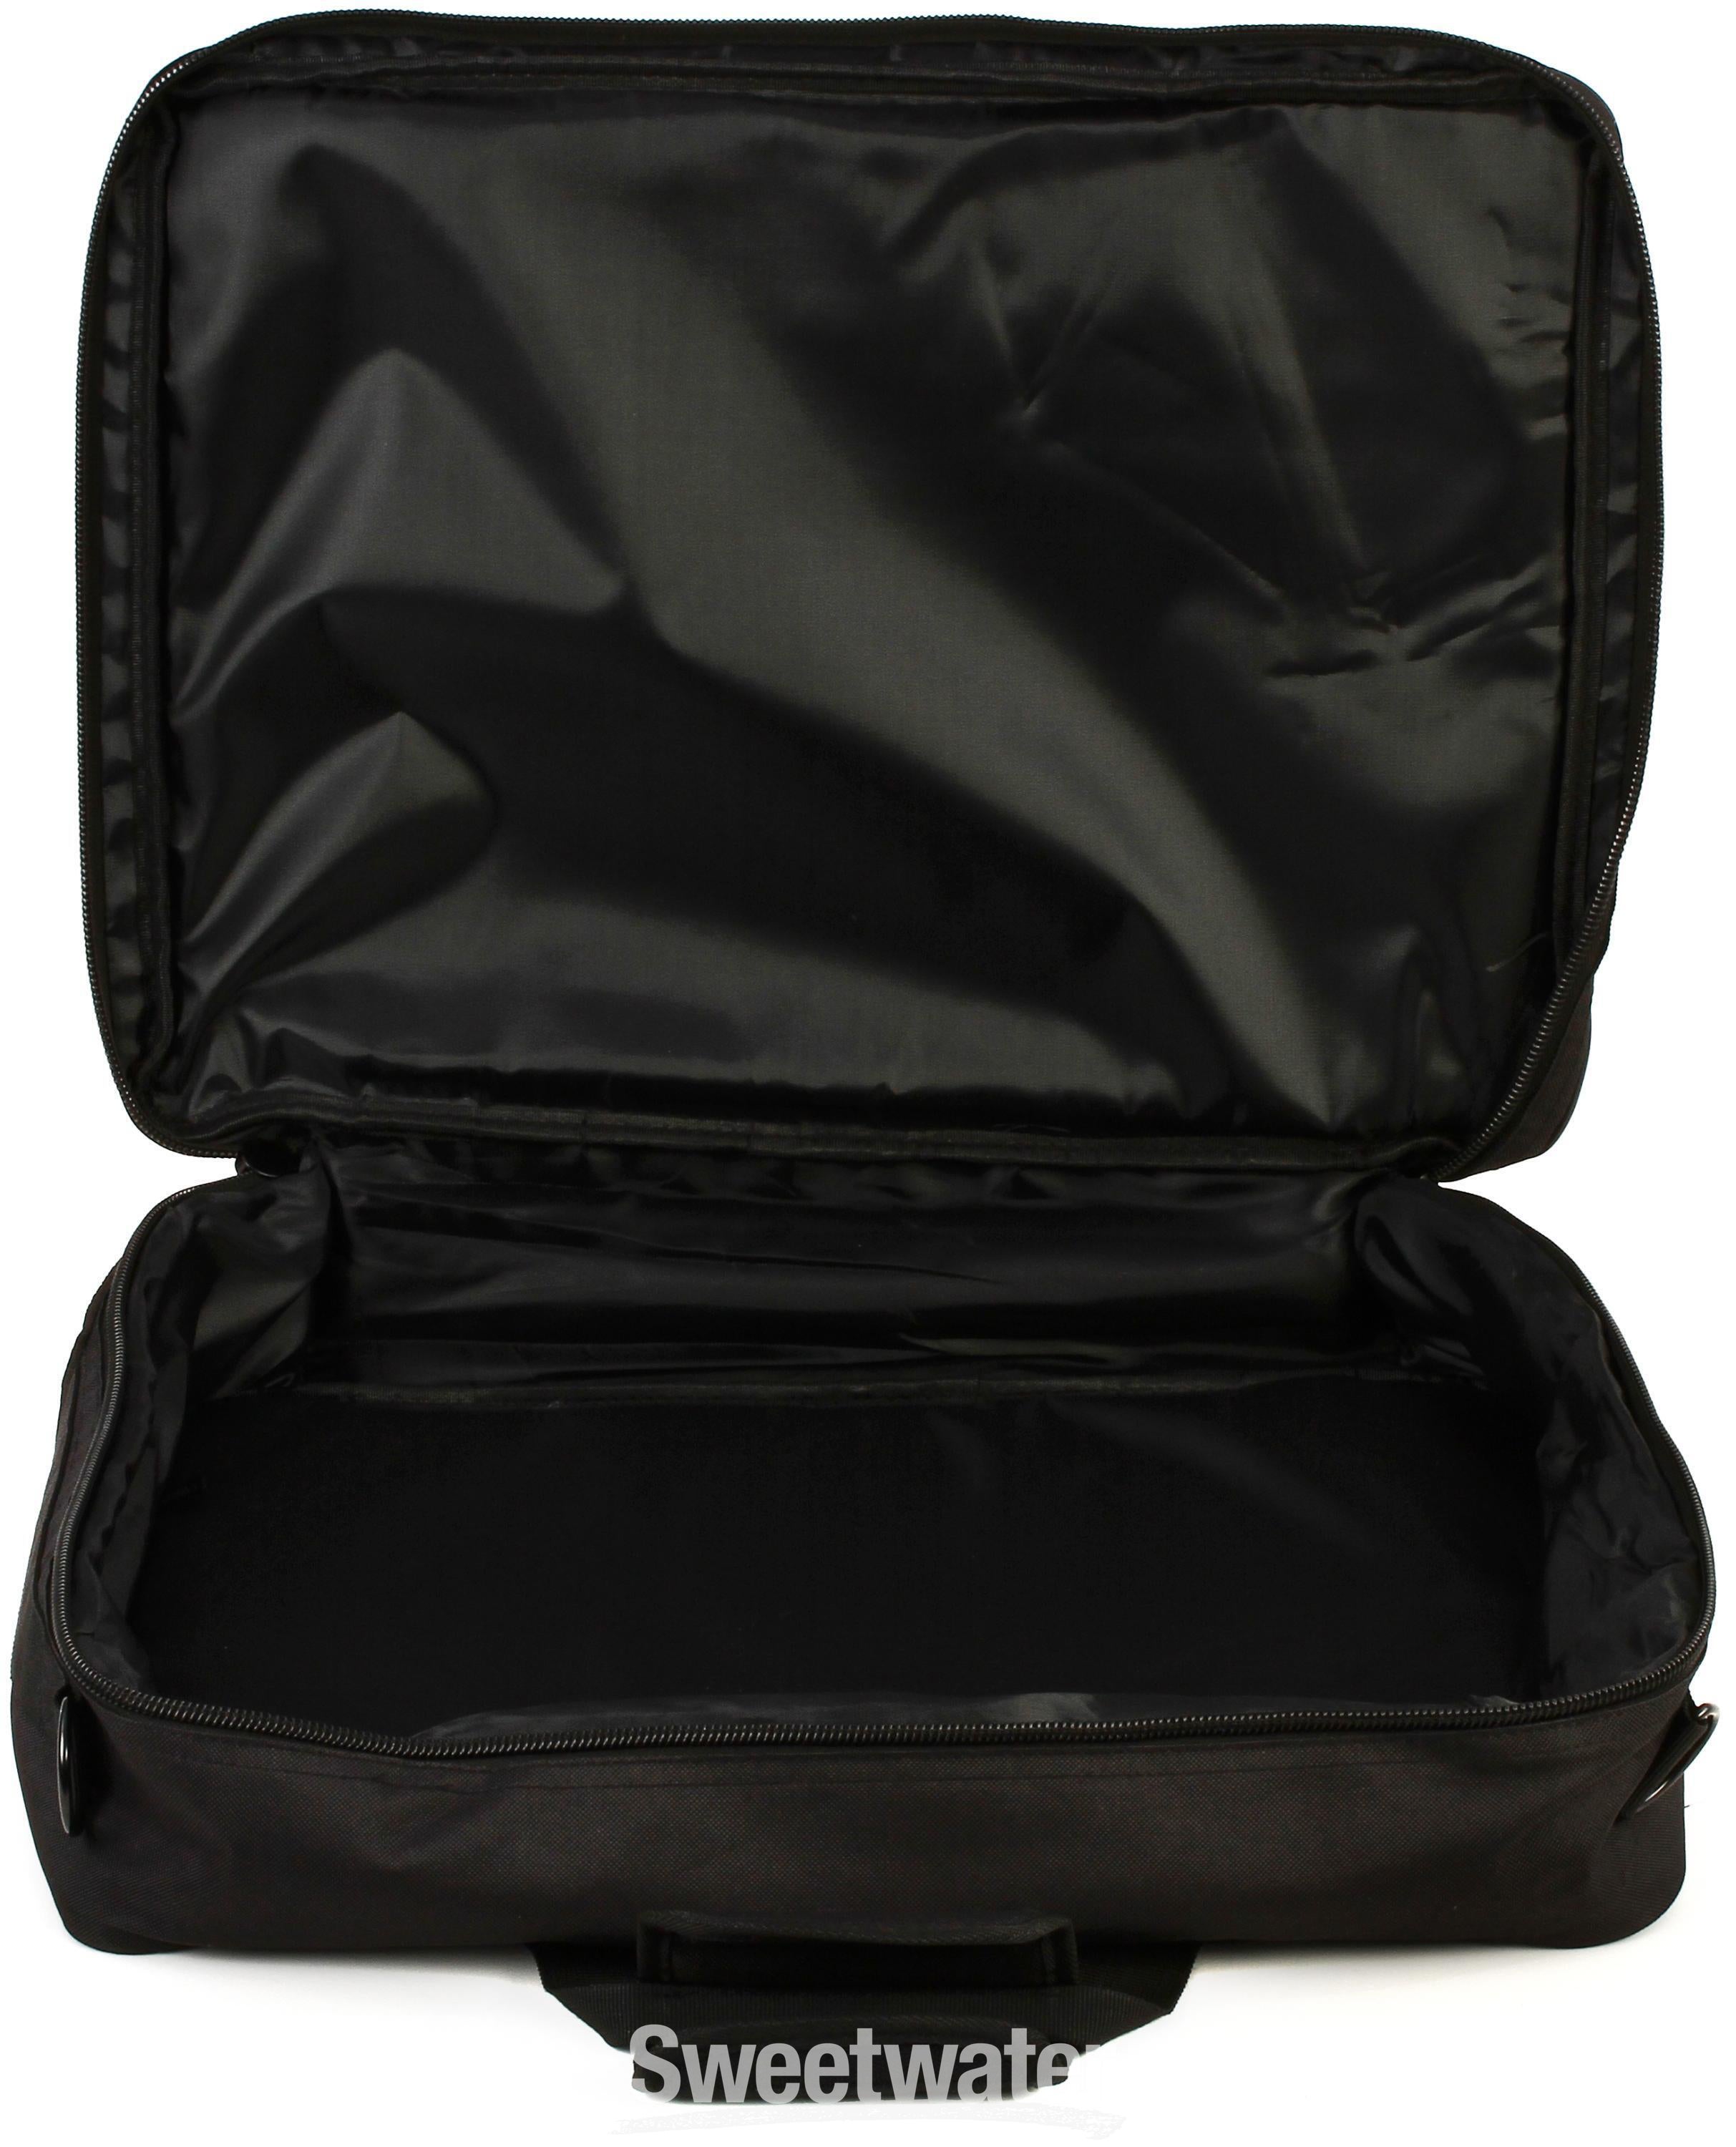 Temple Audio DUO 17 Soft Case | Sweetwater